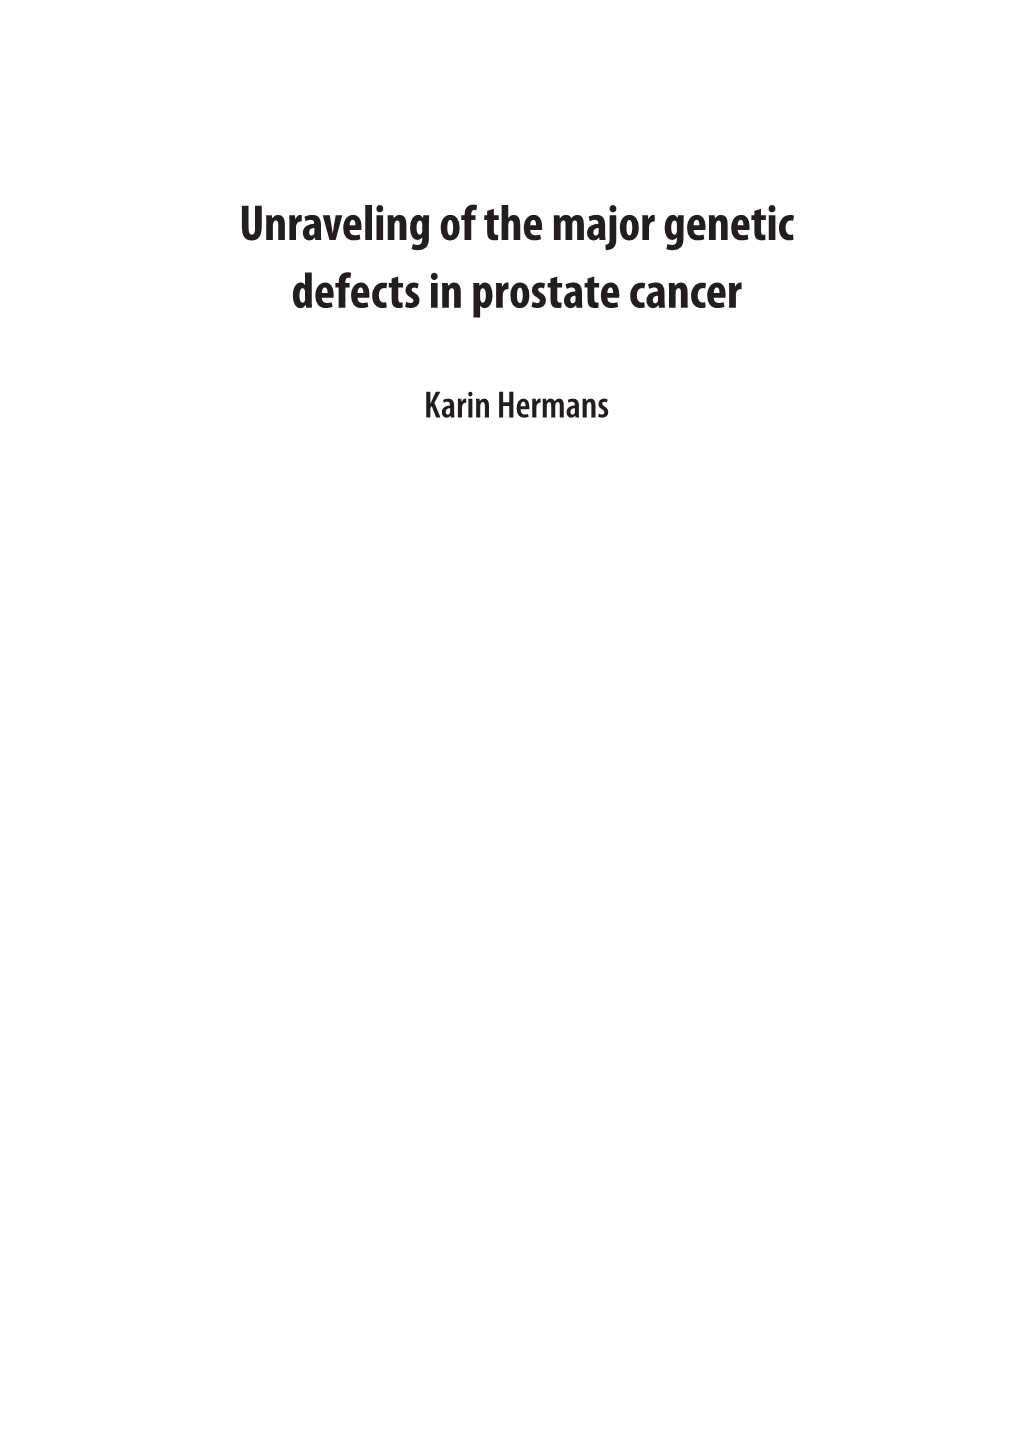 Unraveling of the Major Genetic Defects in Prostate Cancer